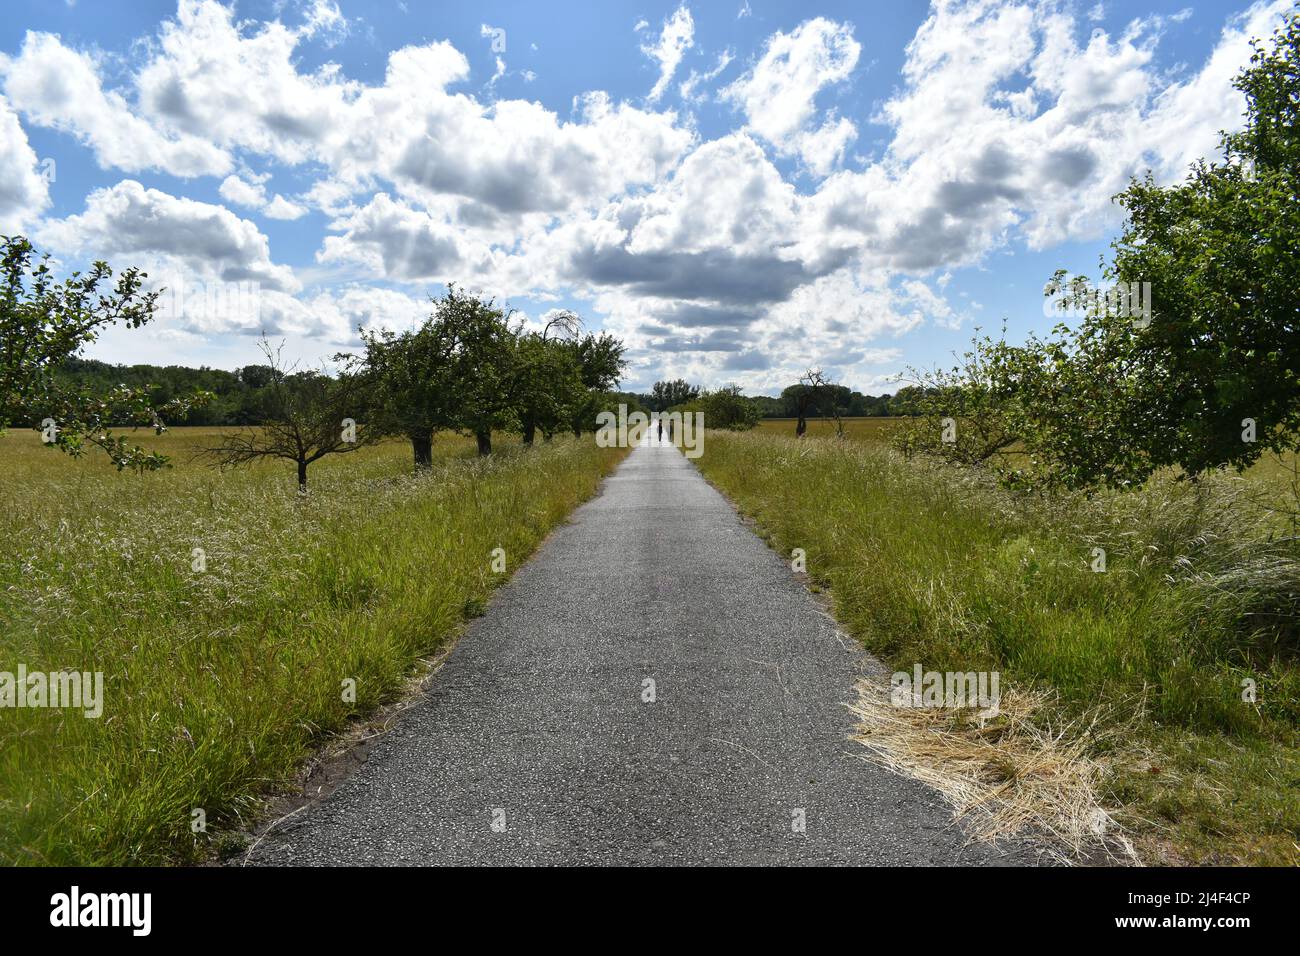 The Way, The Way Forward, The Road, Path, Road, Way, Trip, My Way, Walk of Life, Clouds, Wiese, Apple Trees, Orchard, Horizon, Deminishing Perspective Stock Photo